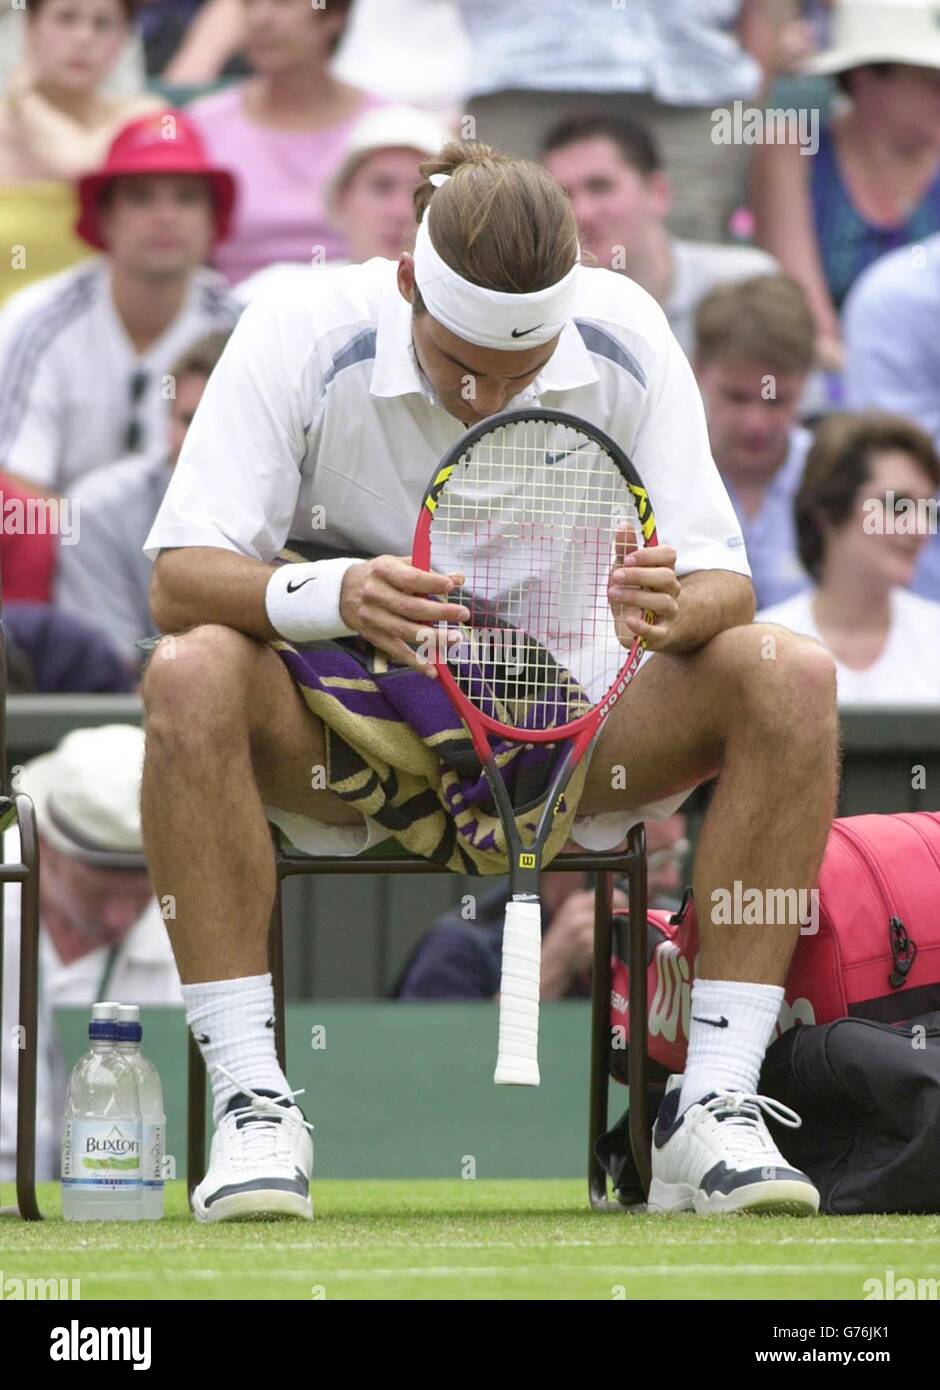 EDITORIAL USE ONLY, NO COMMERCIAL USE. Roger Federer of Switzerland is  disconsolate after losing to the 18 year old Mario Ancic, of Croatia at  Wimbledon. The 7th seed lost in straight sets